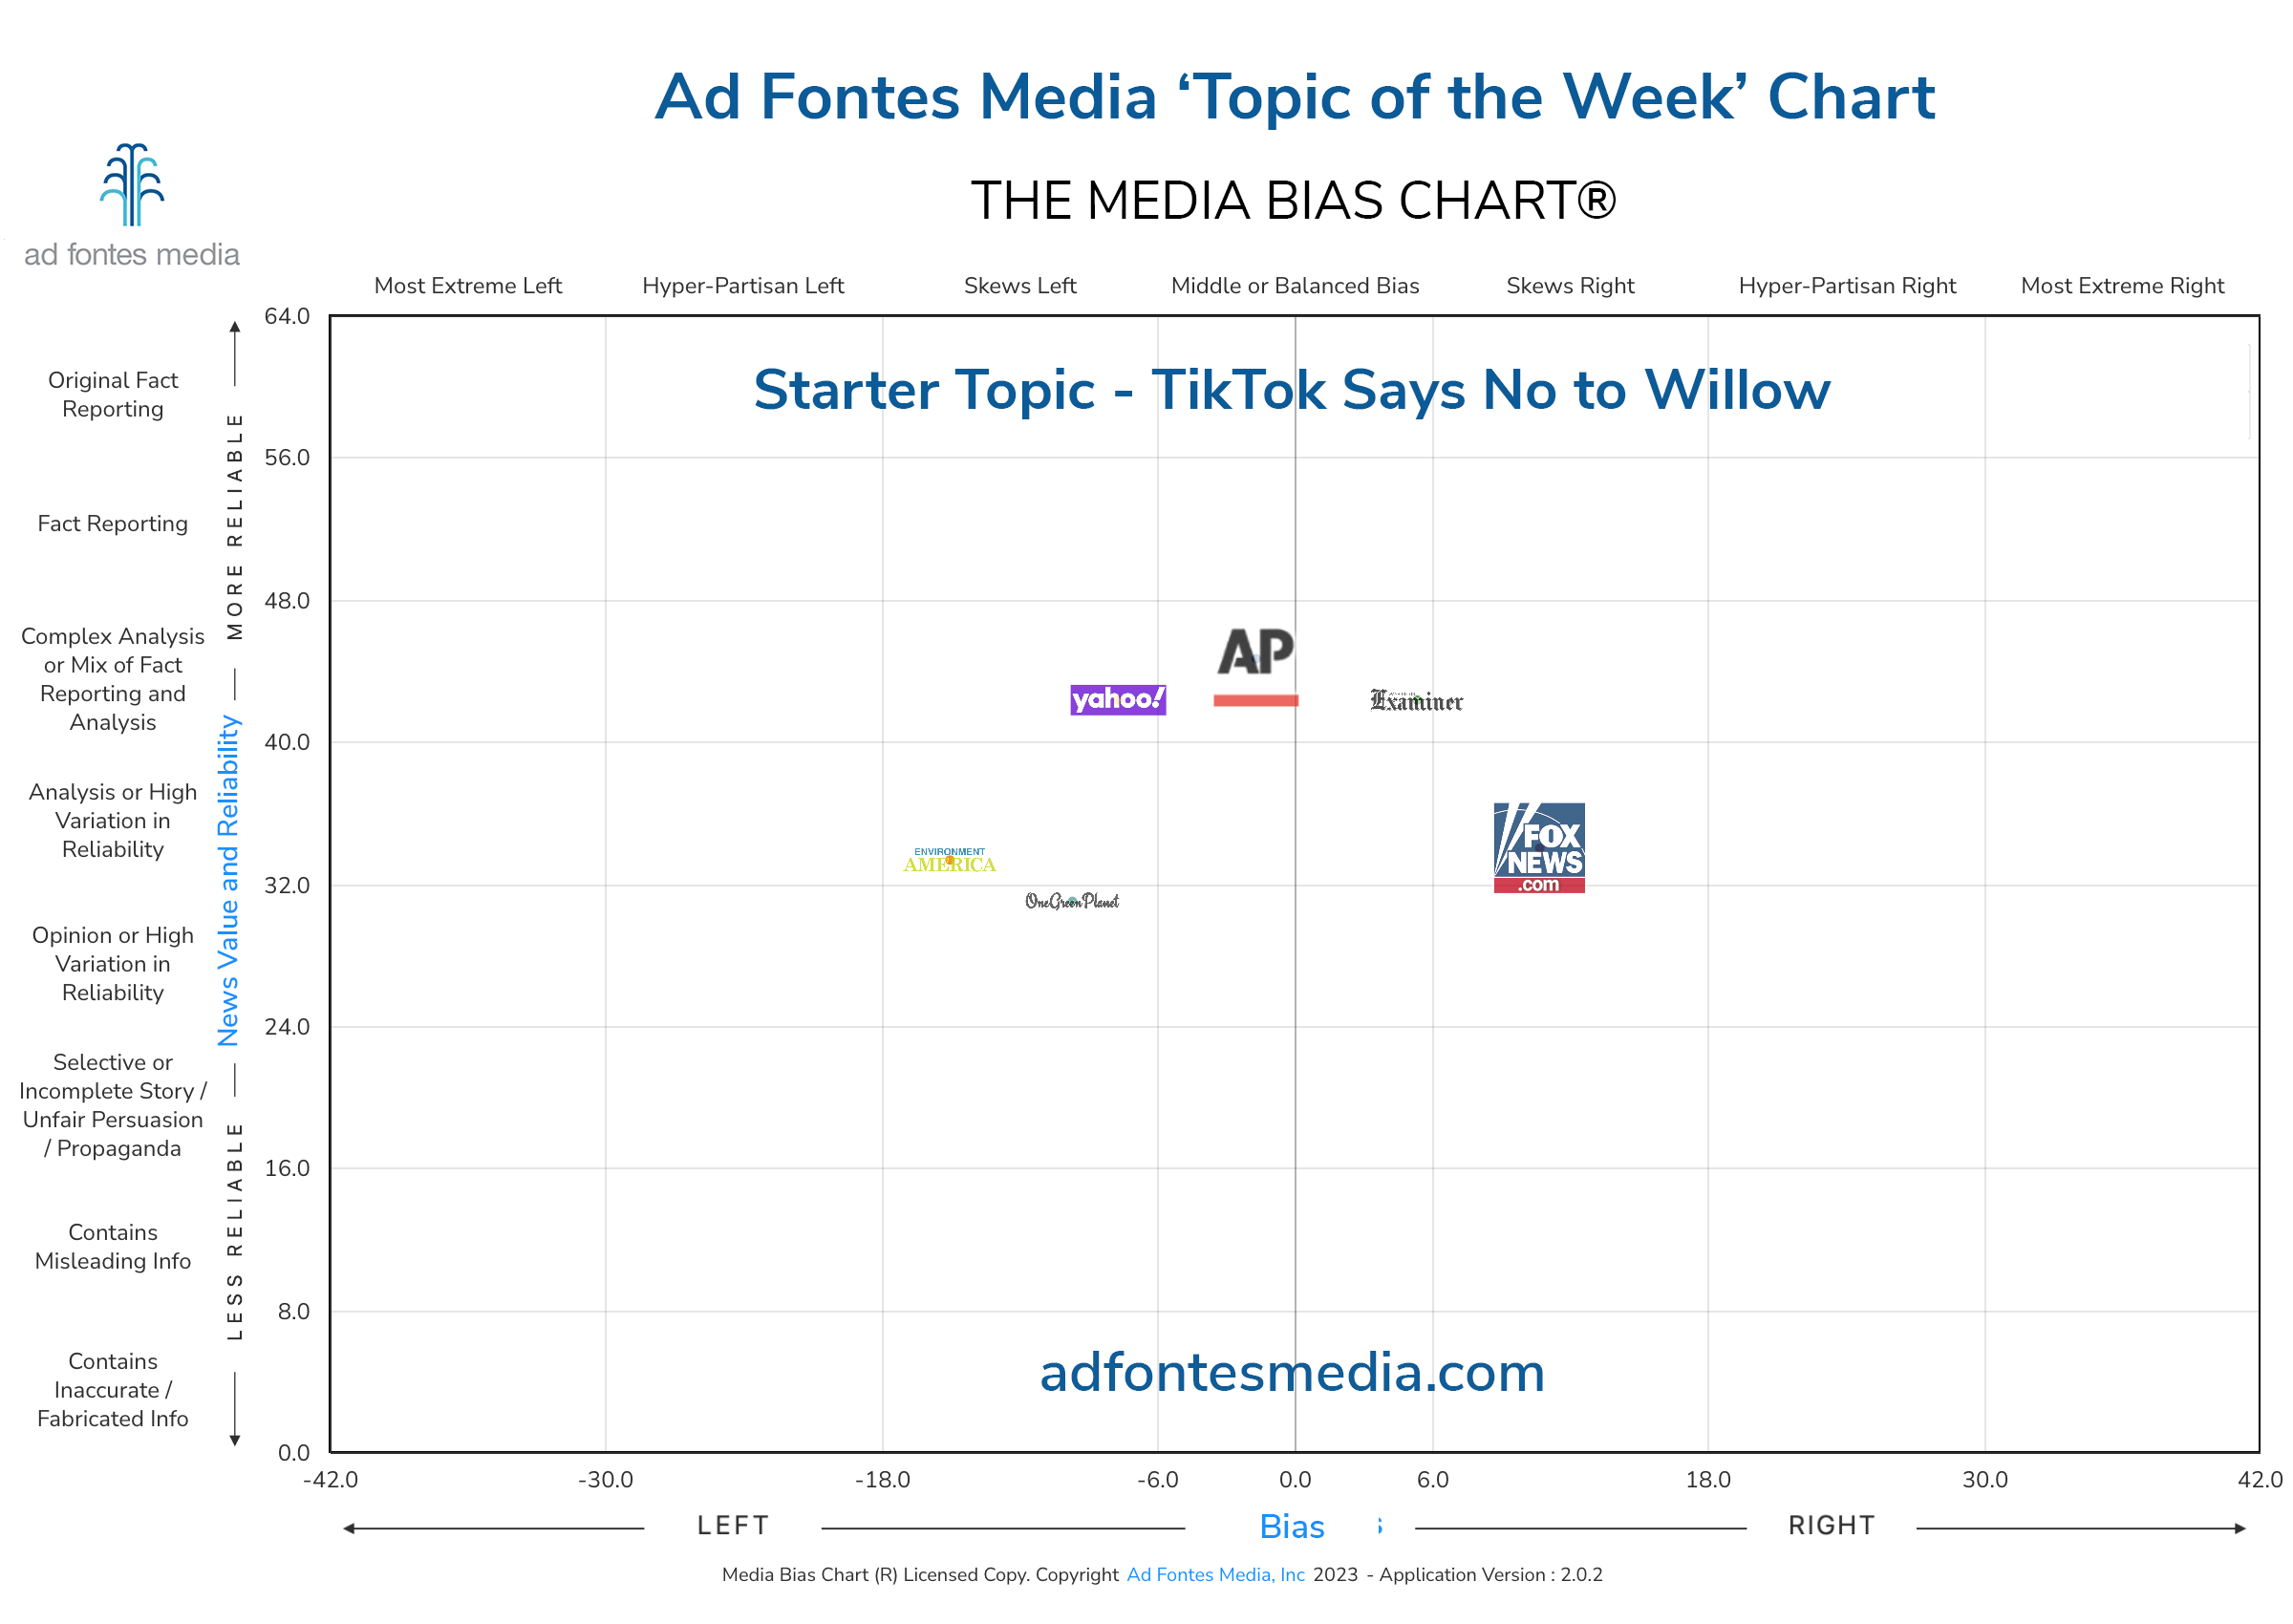 Scores of the TikTok Says No to Willow articles on the chart